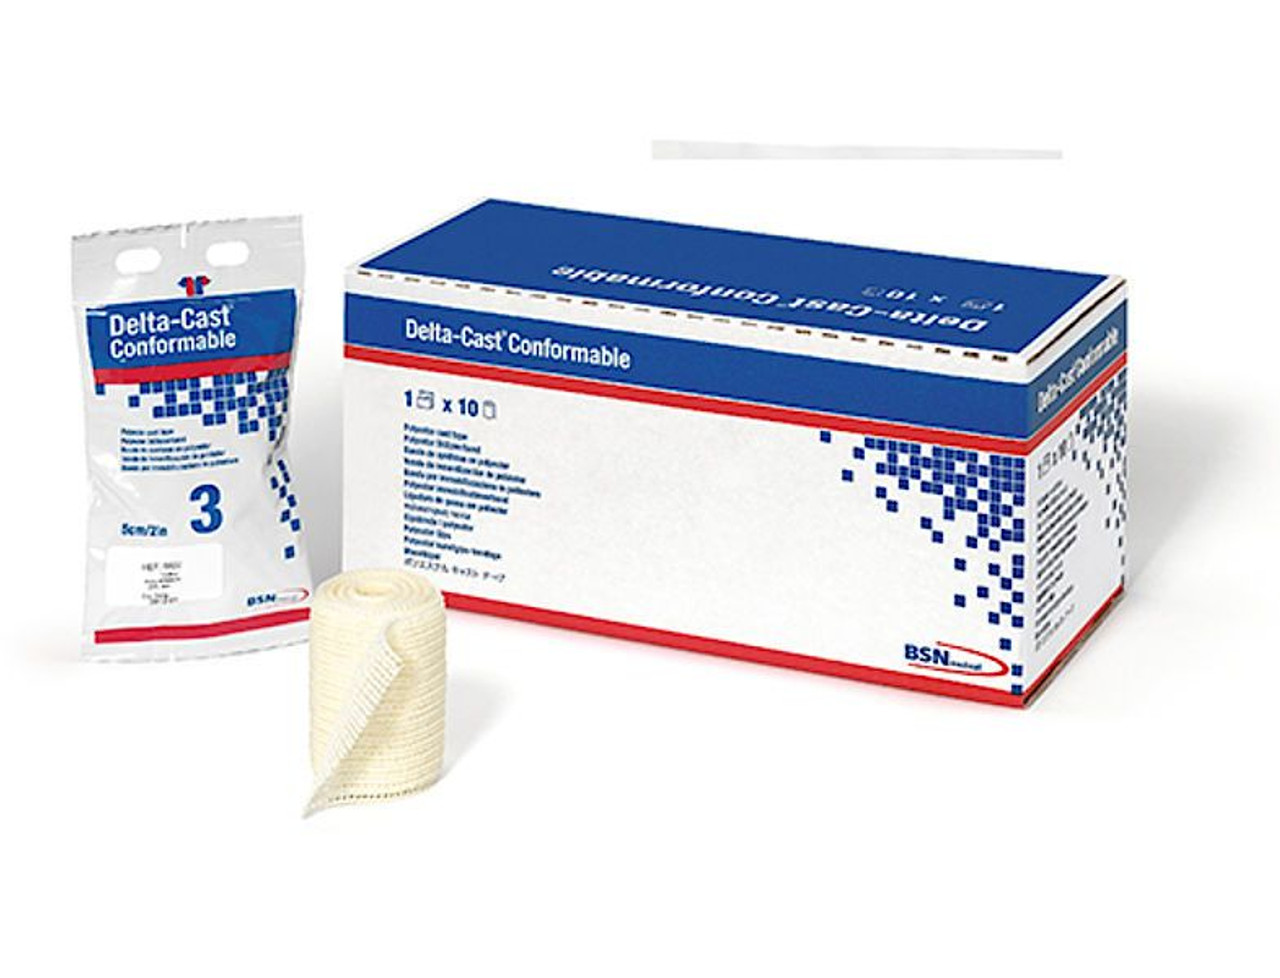 BSN-7228000 BX/10 DELTA-CAST CONFORMABLE POLYESTER CAST TAPE 2.5CM X 1.8M, WHITE